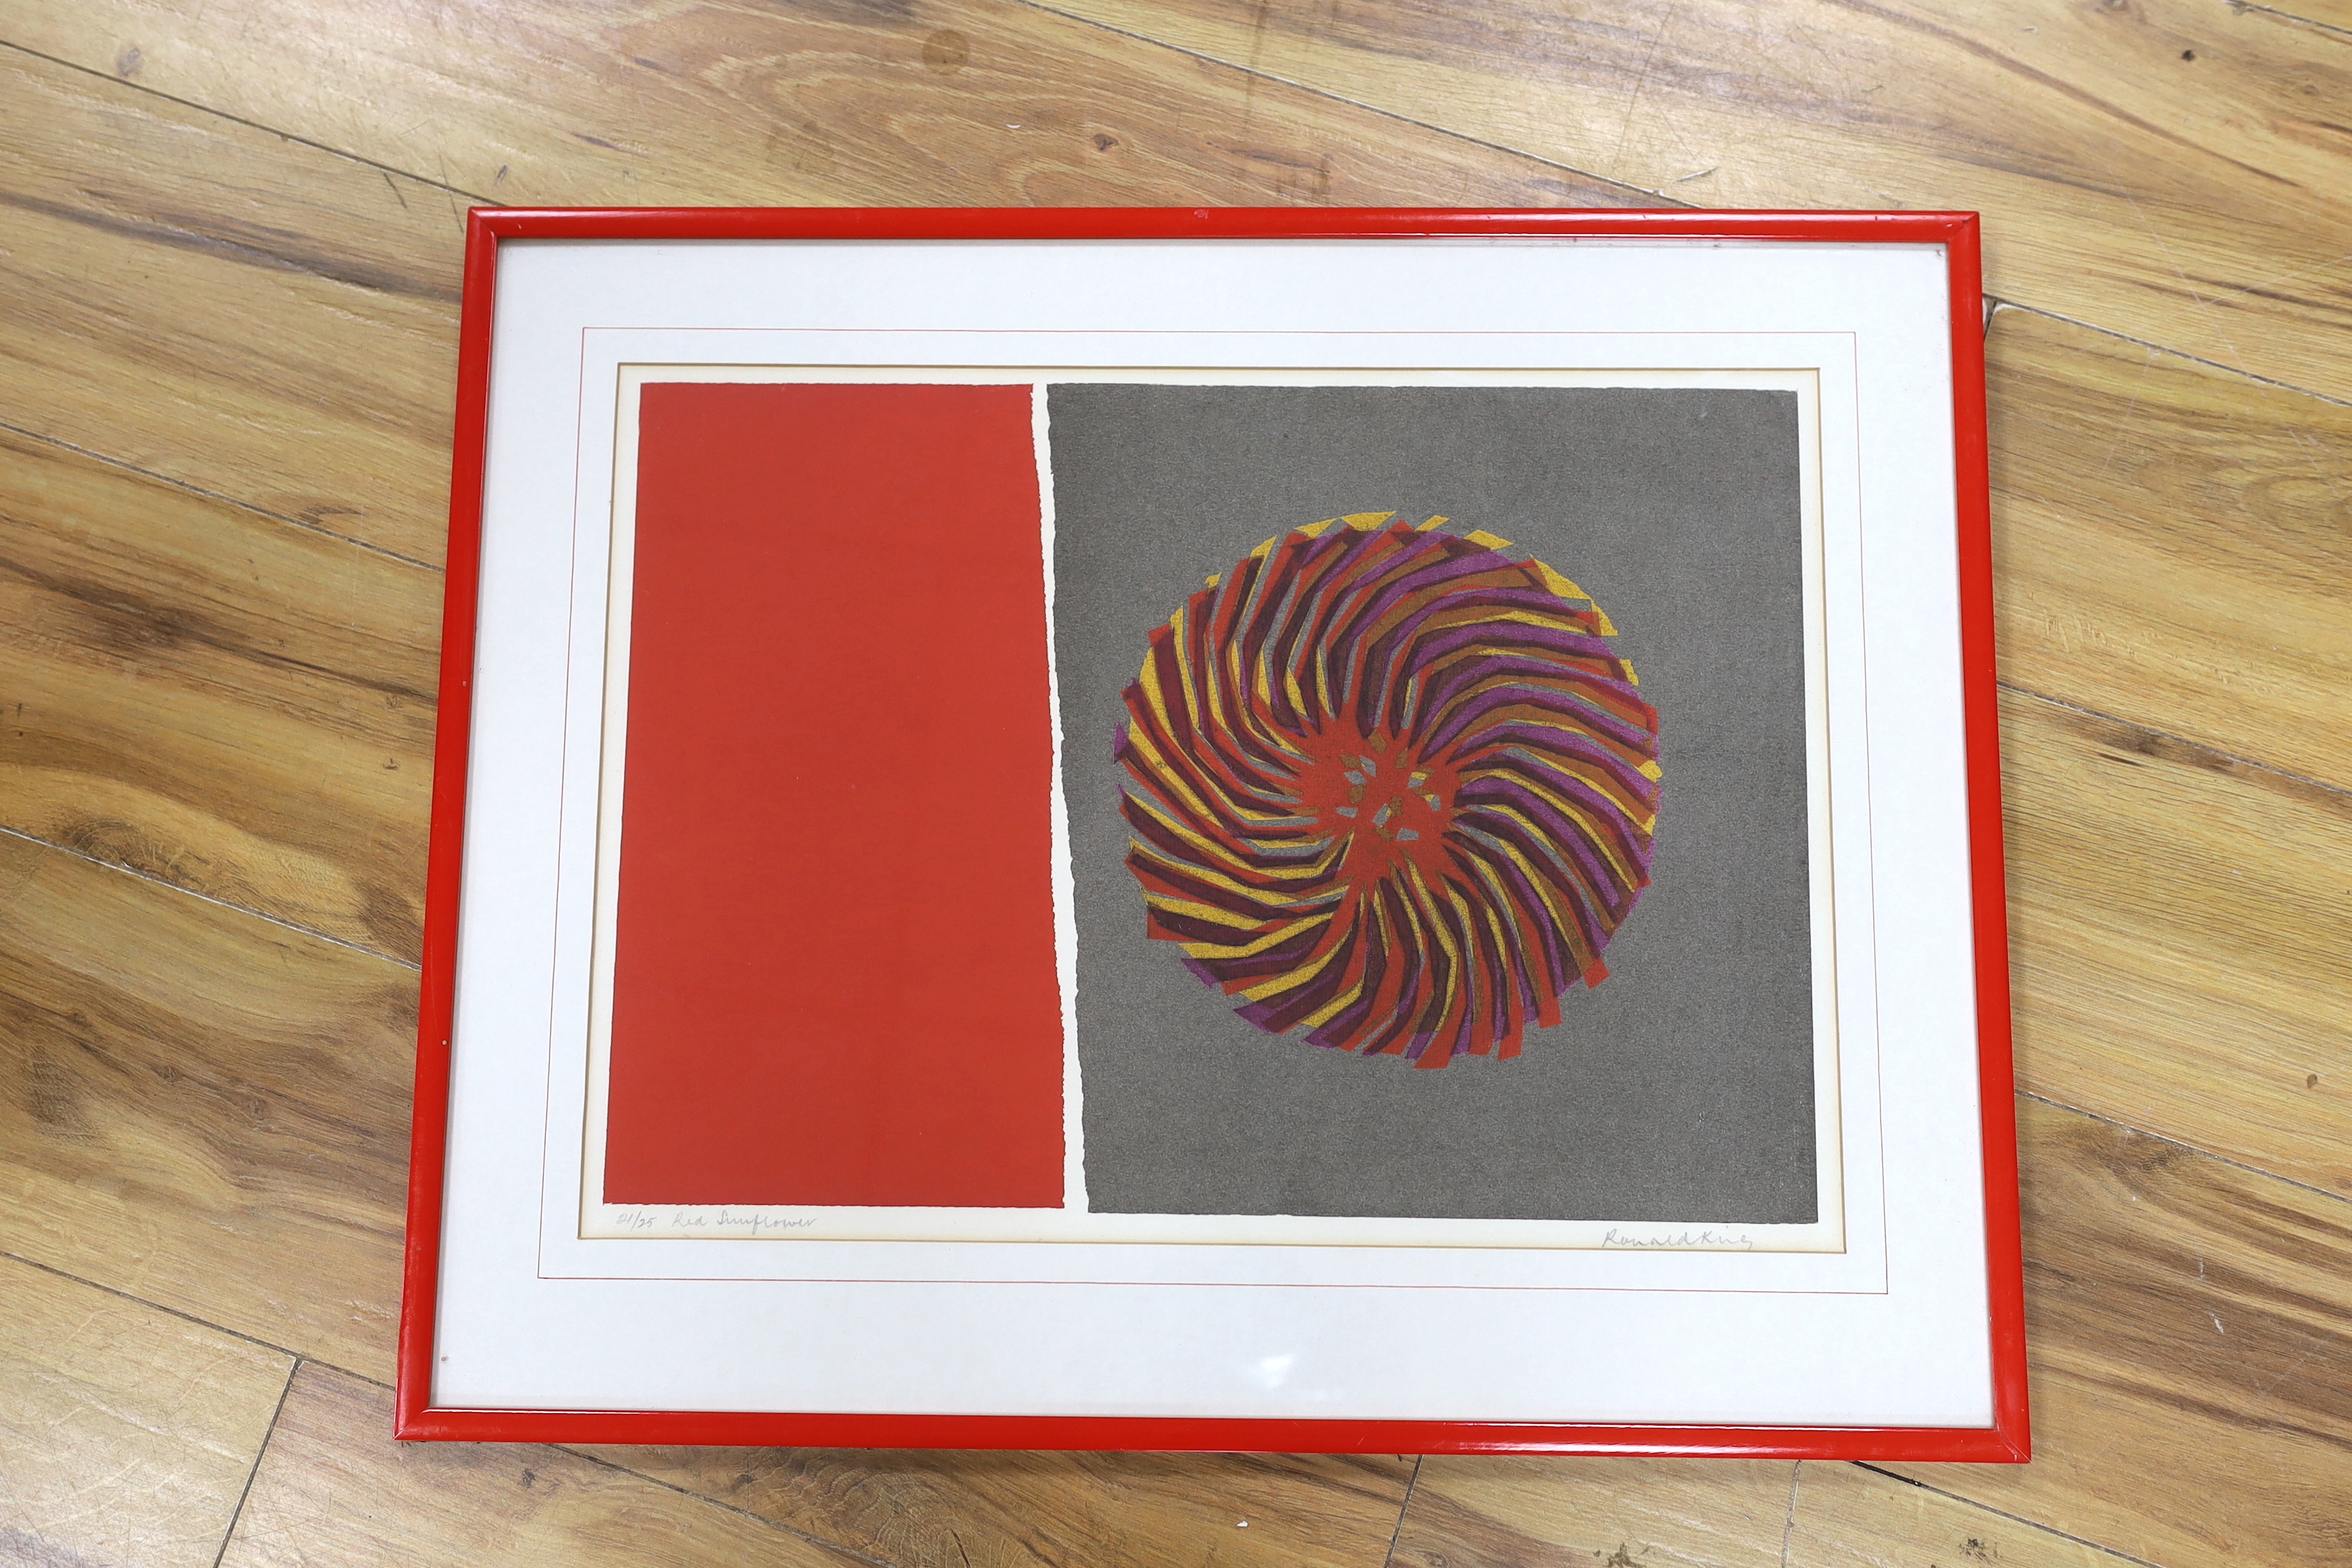 Ronald King (b.1932), colour screenprint, 'Red Sunflower', signed in pencil, limited edition 21/25, 36 x 50cm